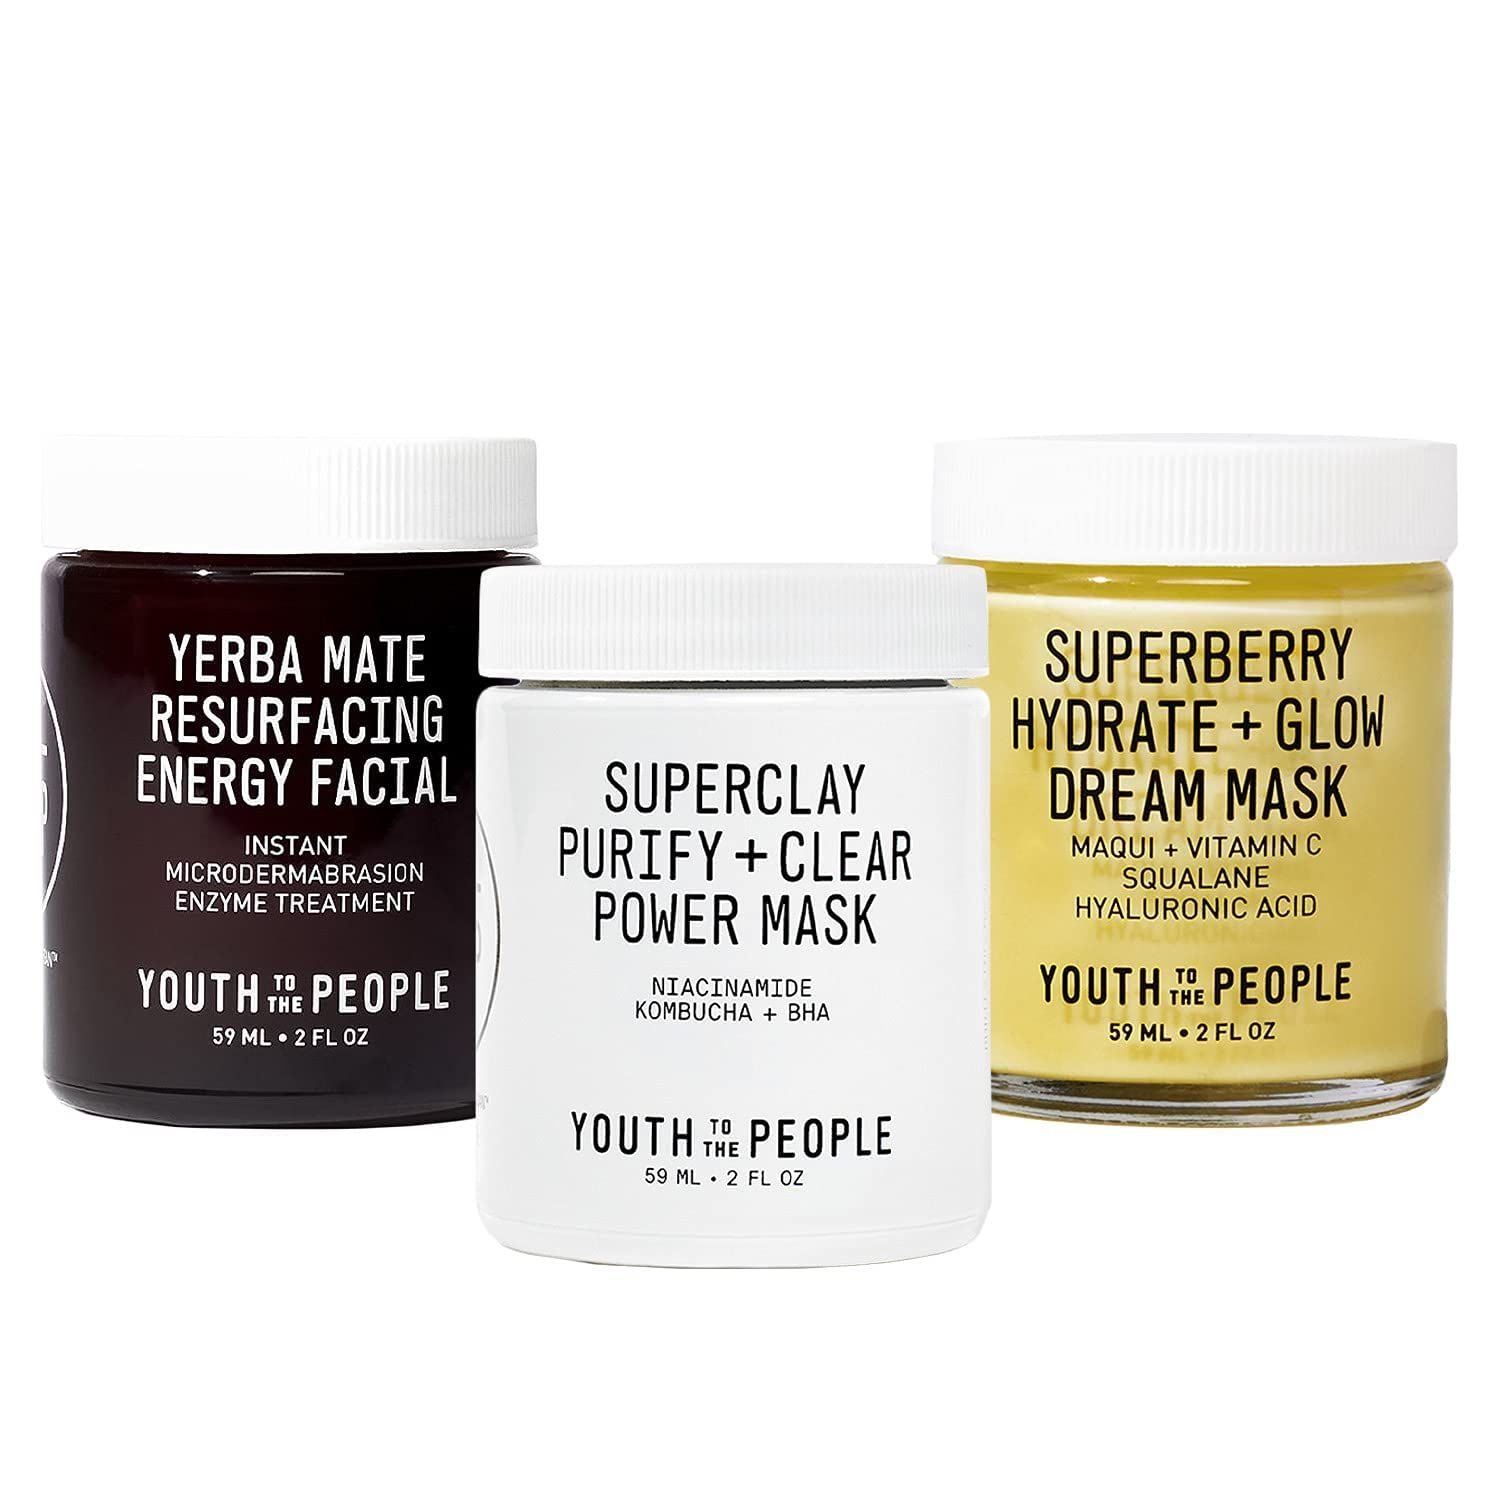 Youth to the People 3-Piece Youth Treatment Set - Overnight Superberry Hydrate + Glow Dream Mask, Ex | Amazon (US)